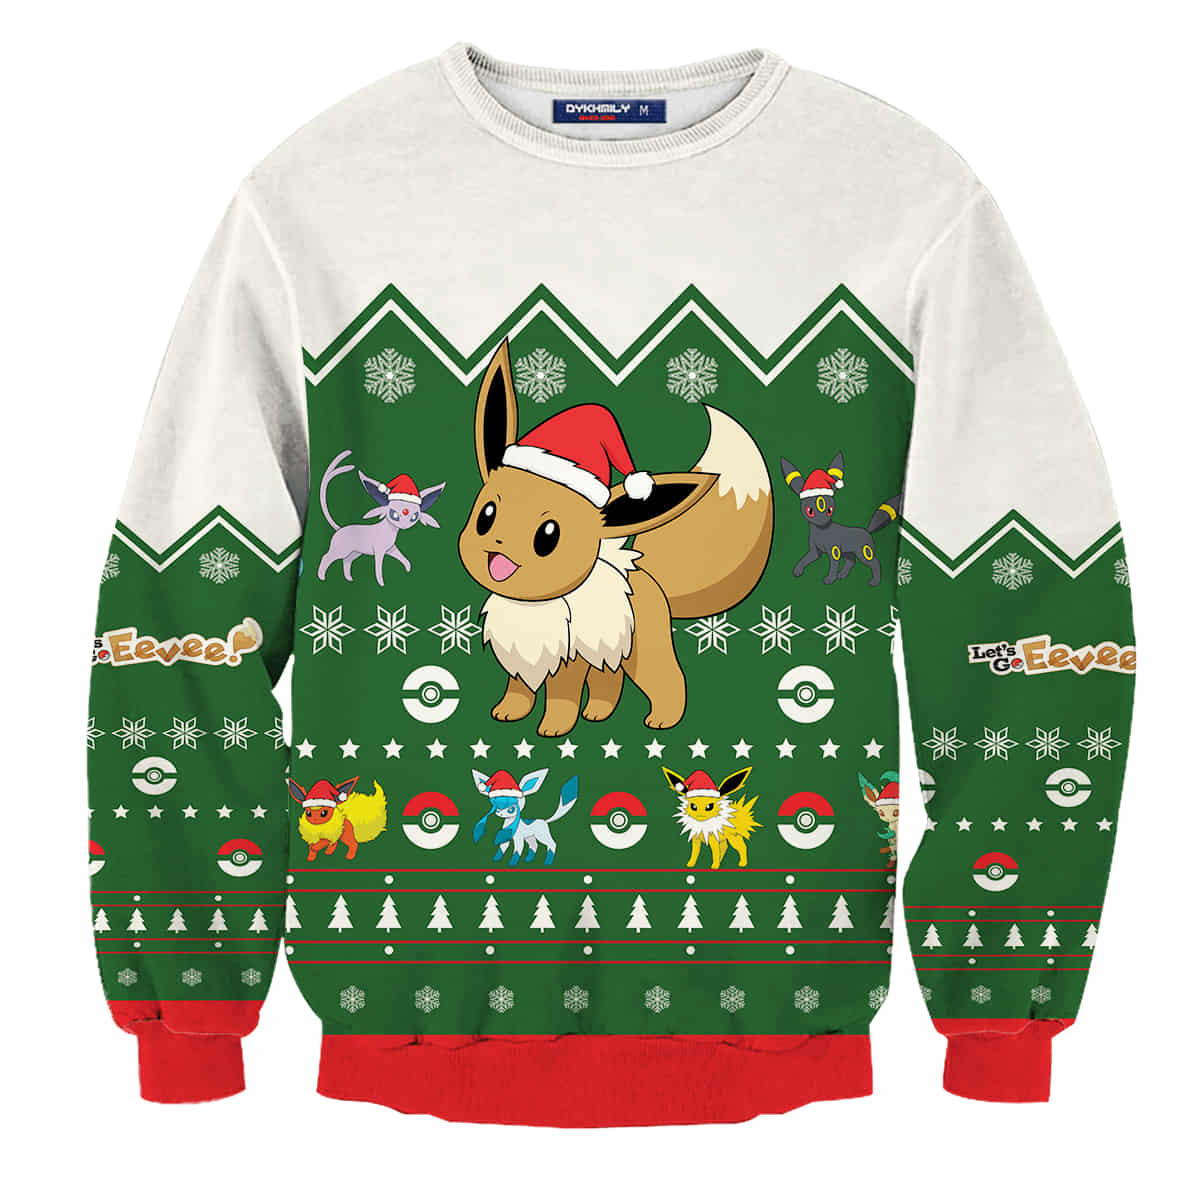 Evee Pokemon Wool Knitted Sweater, Christmas 3D Sweater